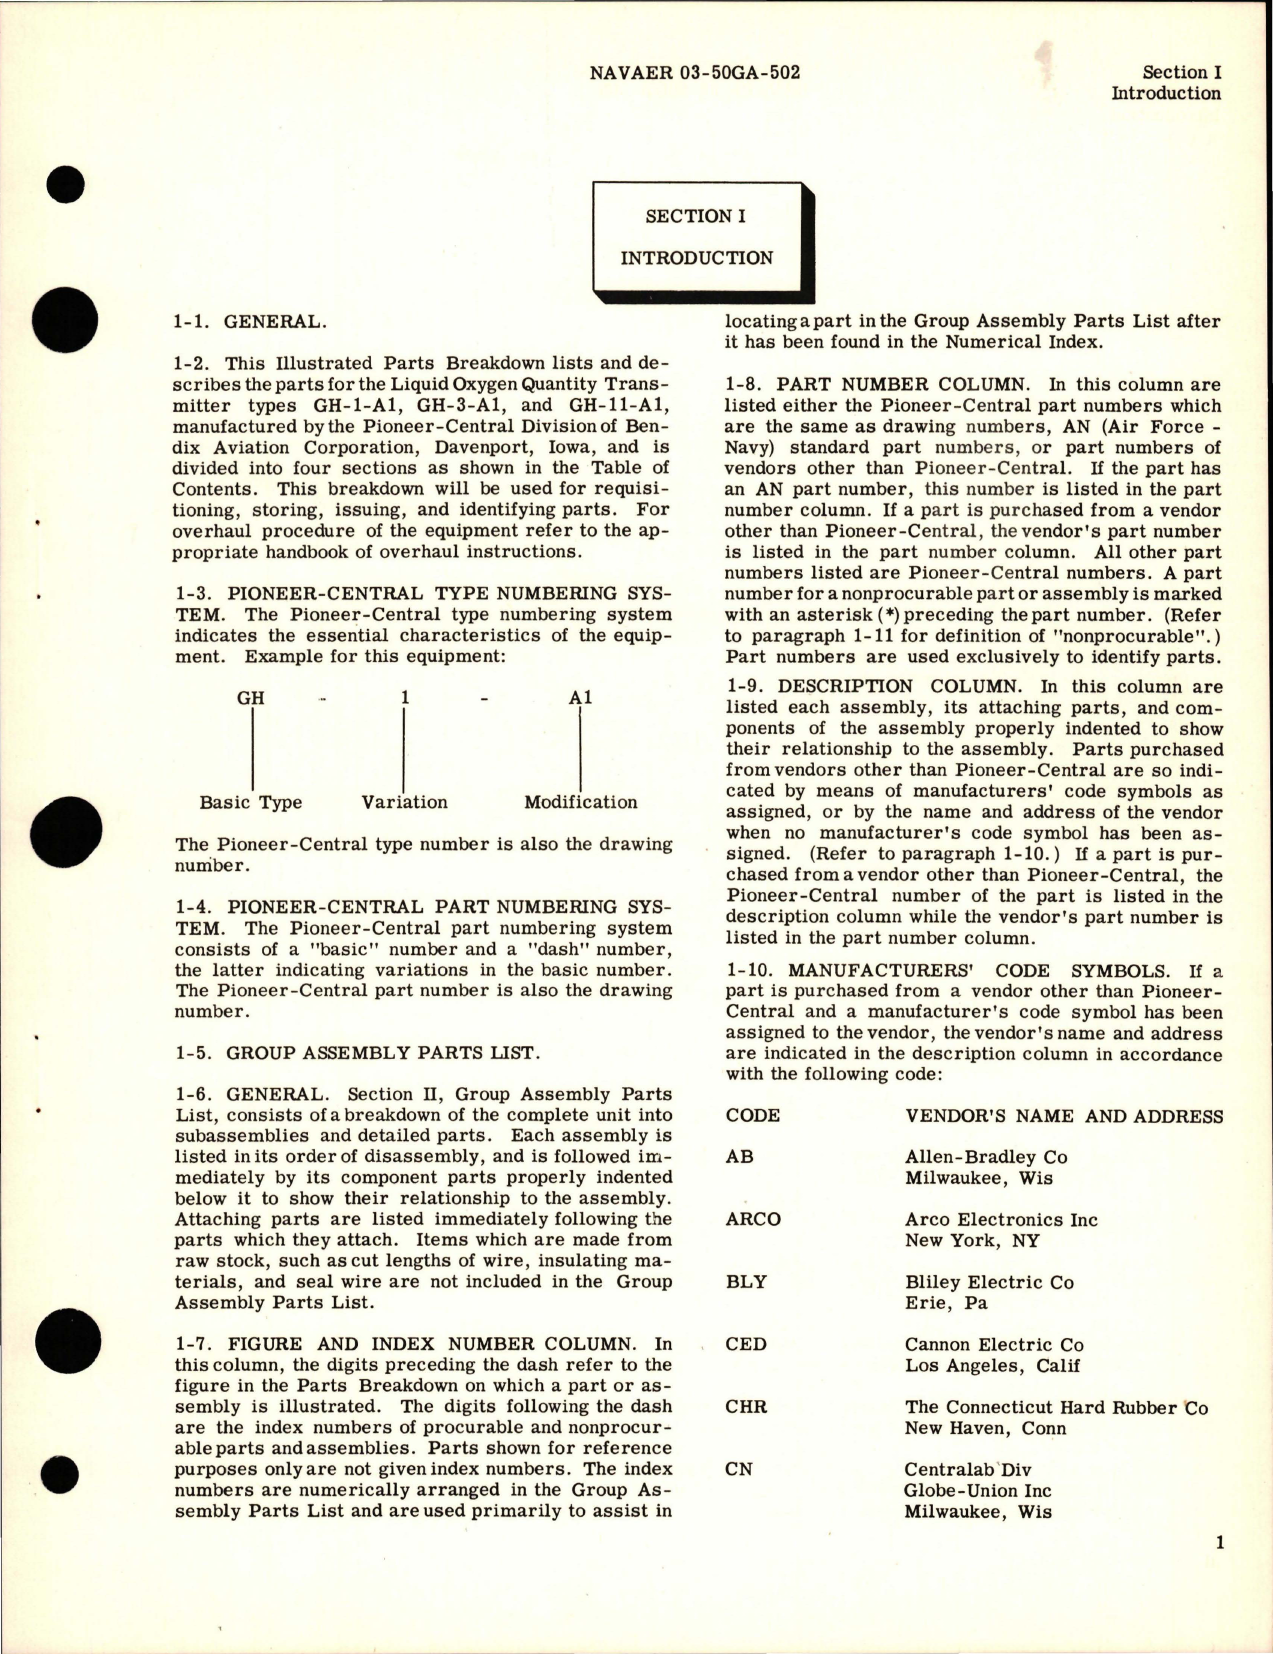 Sample page 5 from AirCorps Library document: Illustrated Parts Breakdown for Liquid Oxygen Quantity Transmitter - Types GH-1-A1, GH-3-A1, and GH-11-A1 